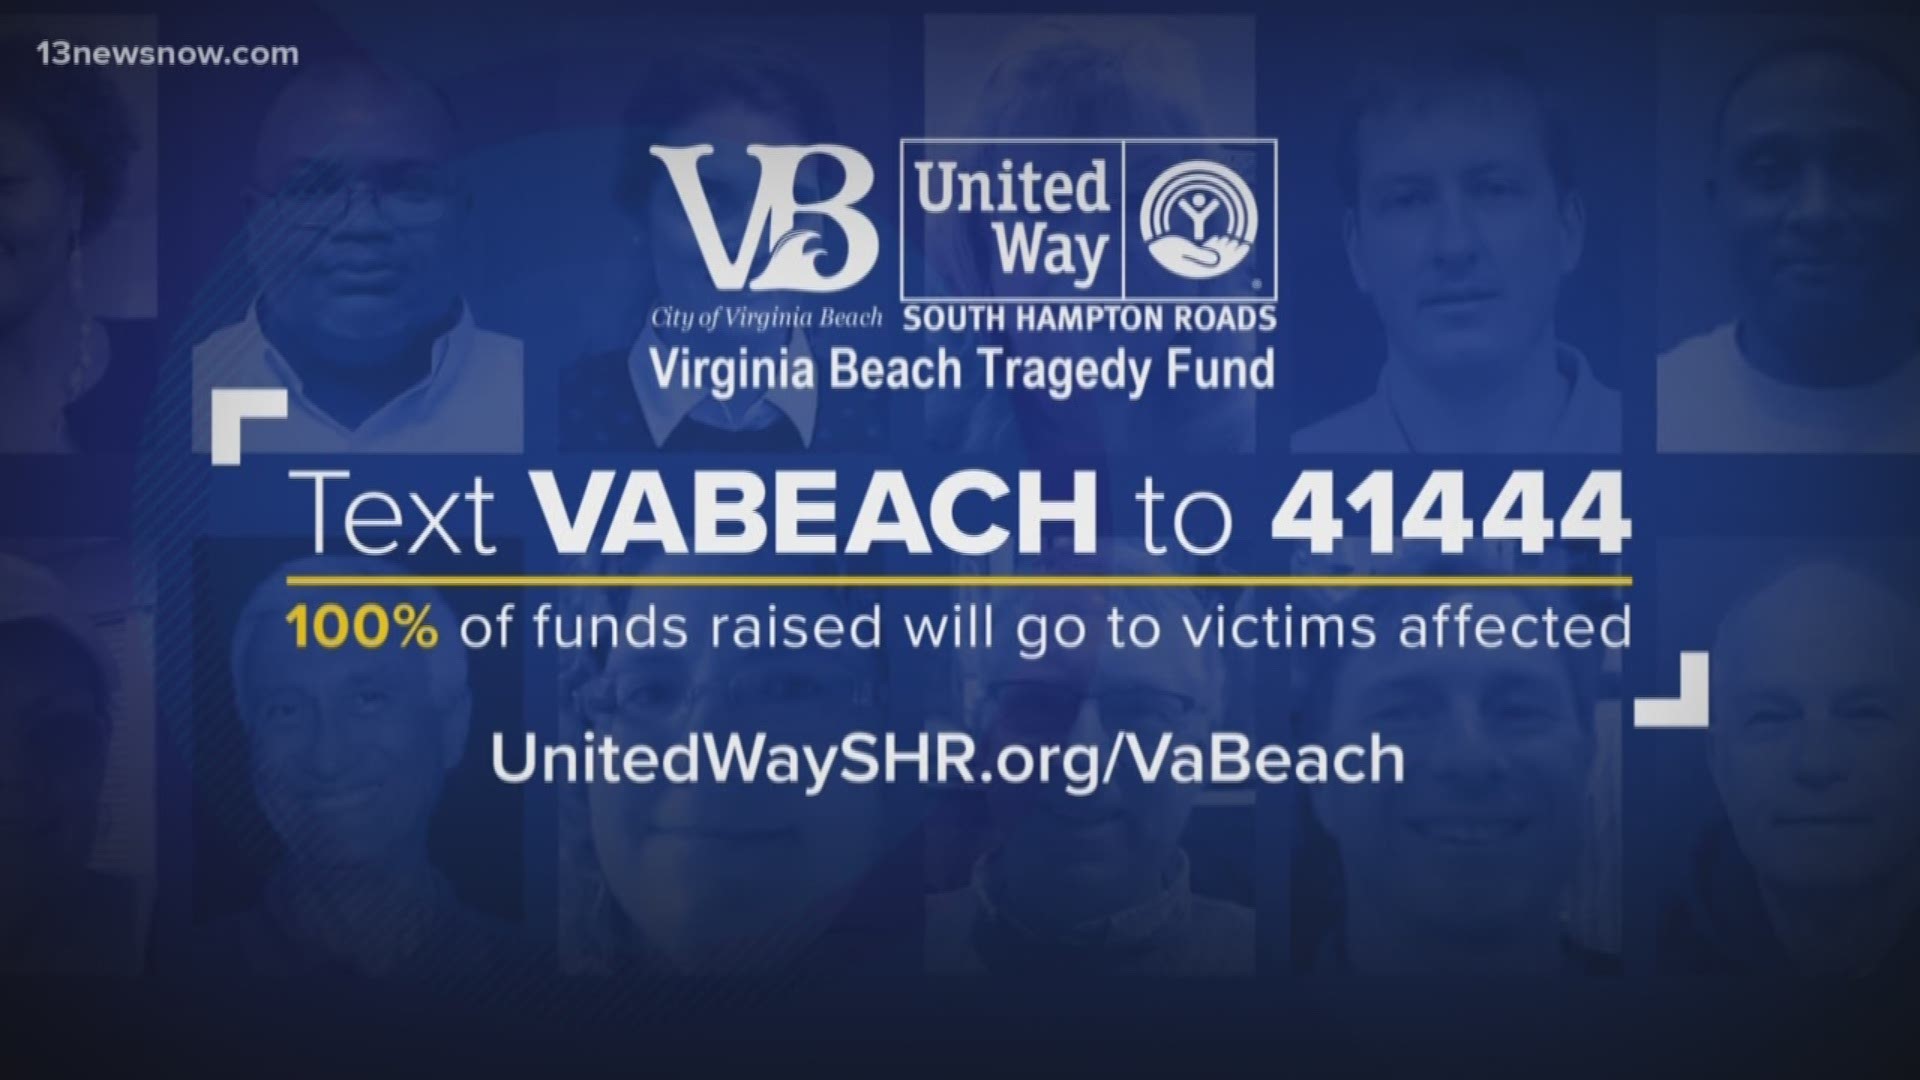 On May 31st, a gunman killed 12 people in the Virginia Beach Municipal Center. A fund was created by the United Way of South Hampton Roads. The organization said the fund has over $4 million.